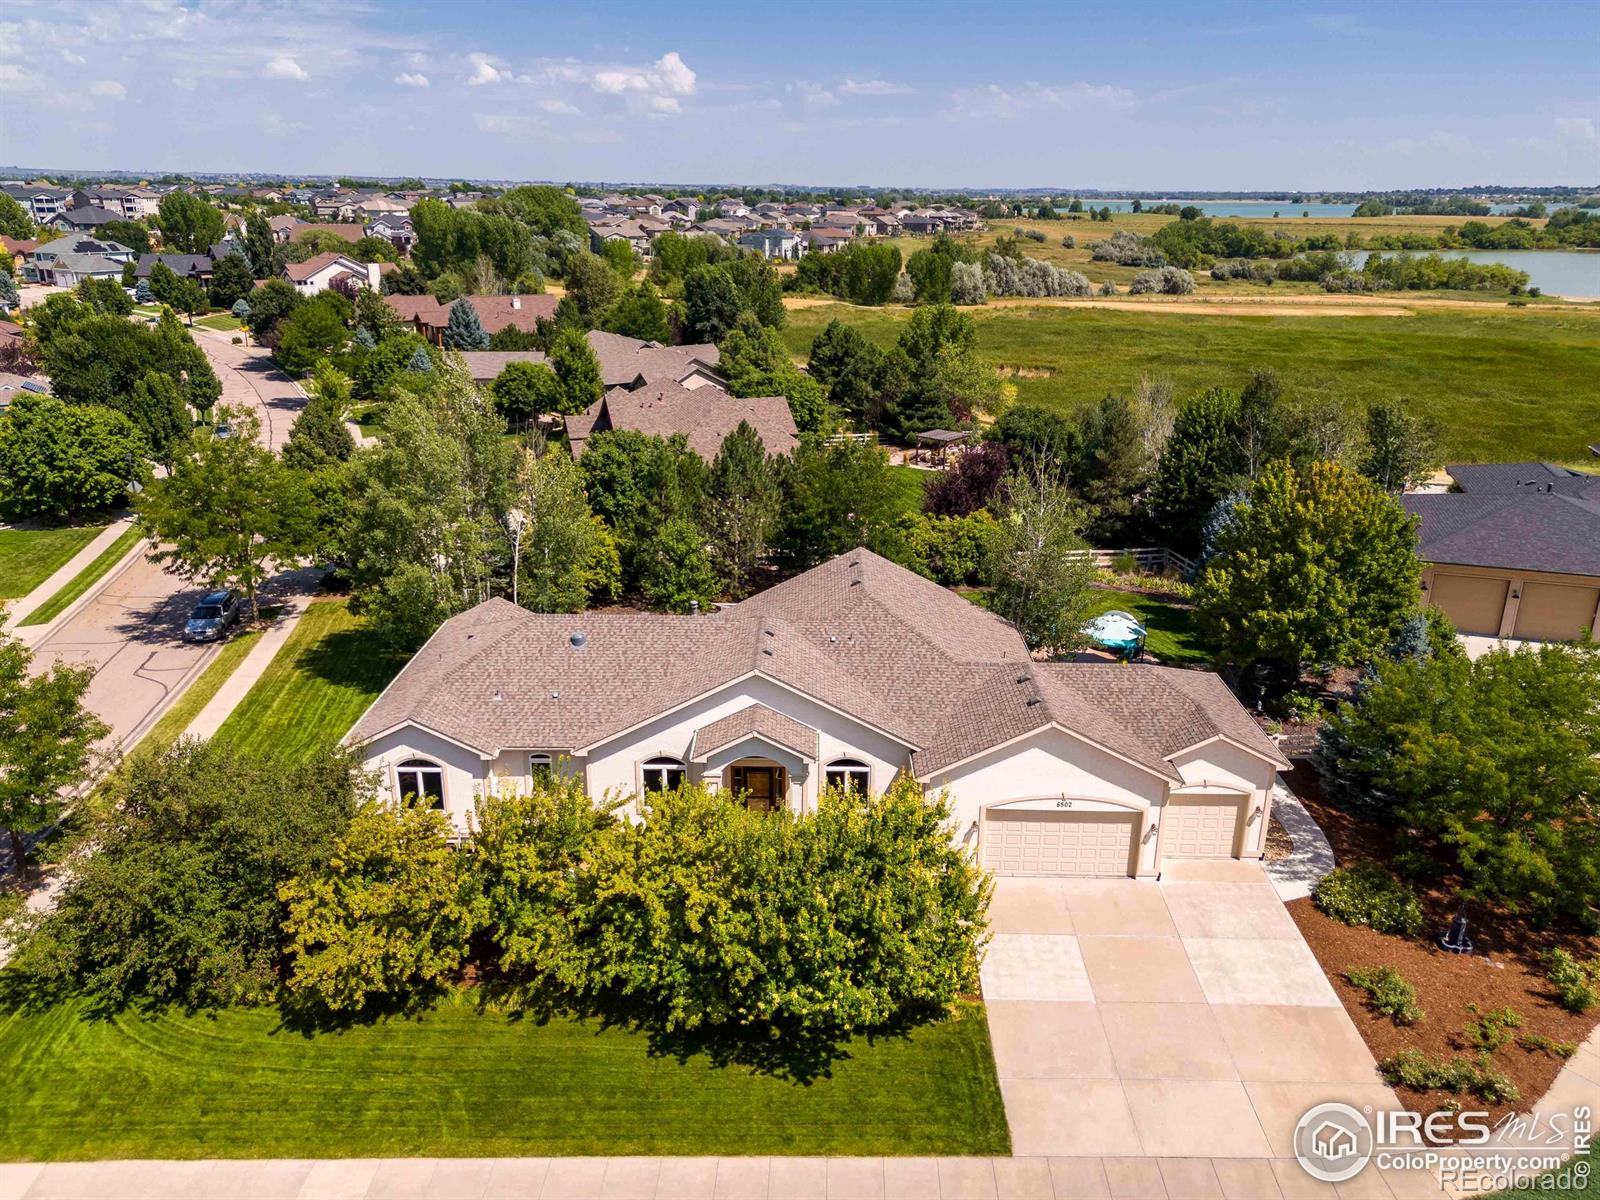 6502  Westchase Court, fort collins MLS: 456789995089 Beds: 5 Baths: 4 Price: $1,225,000